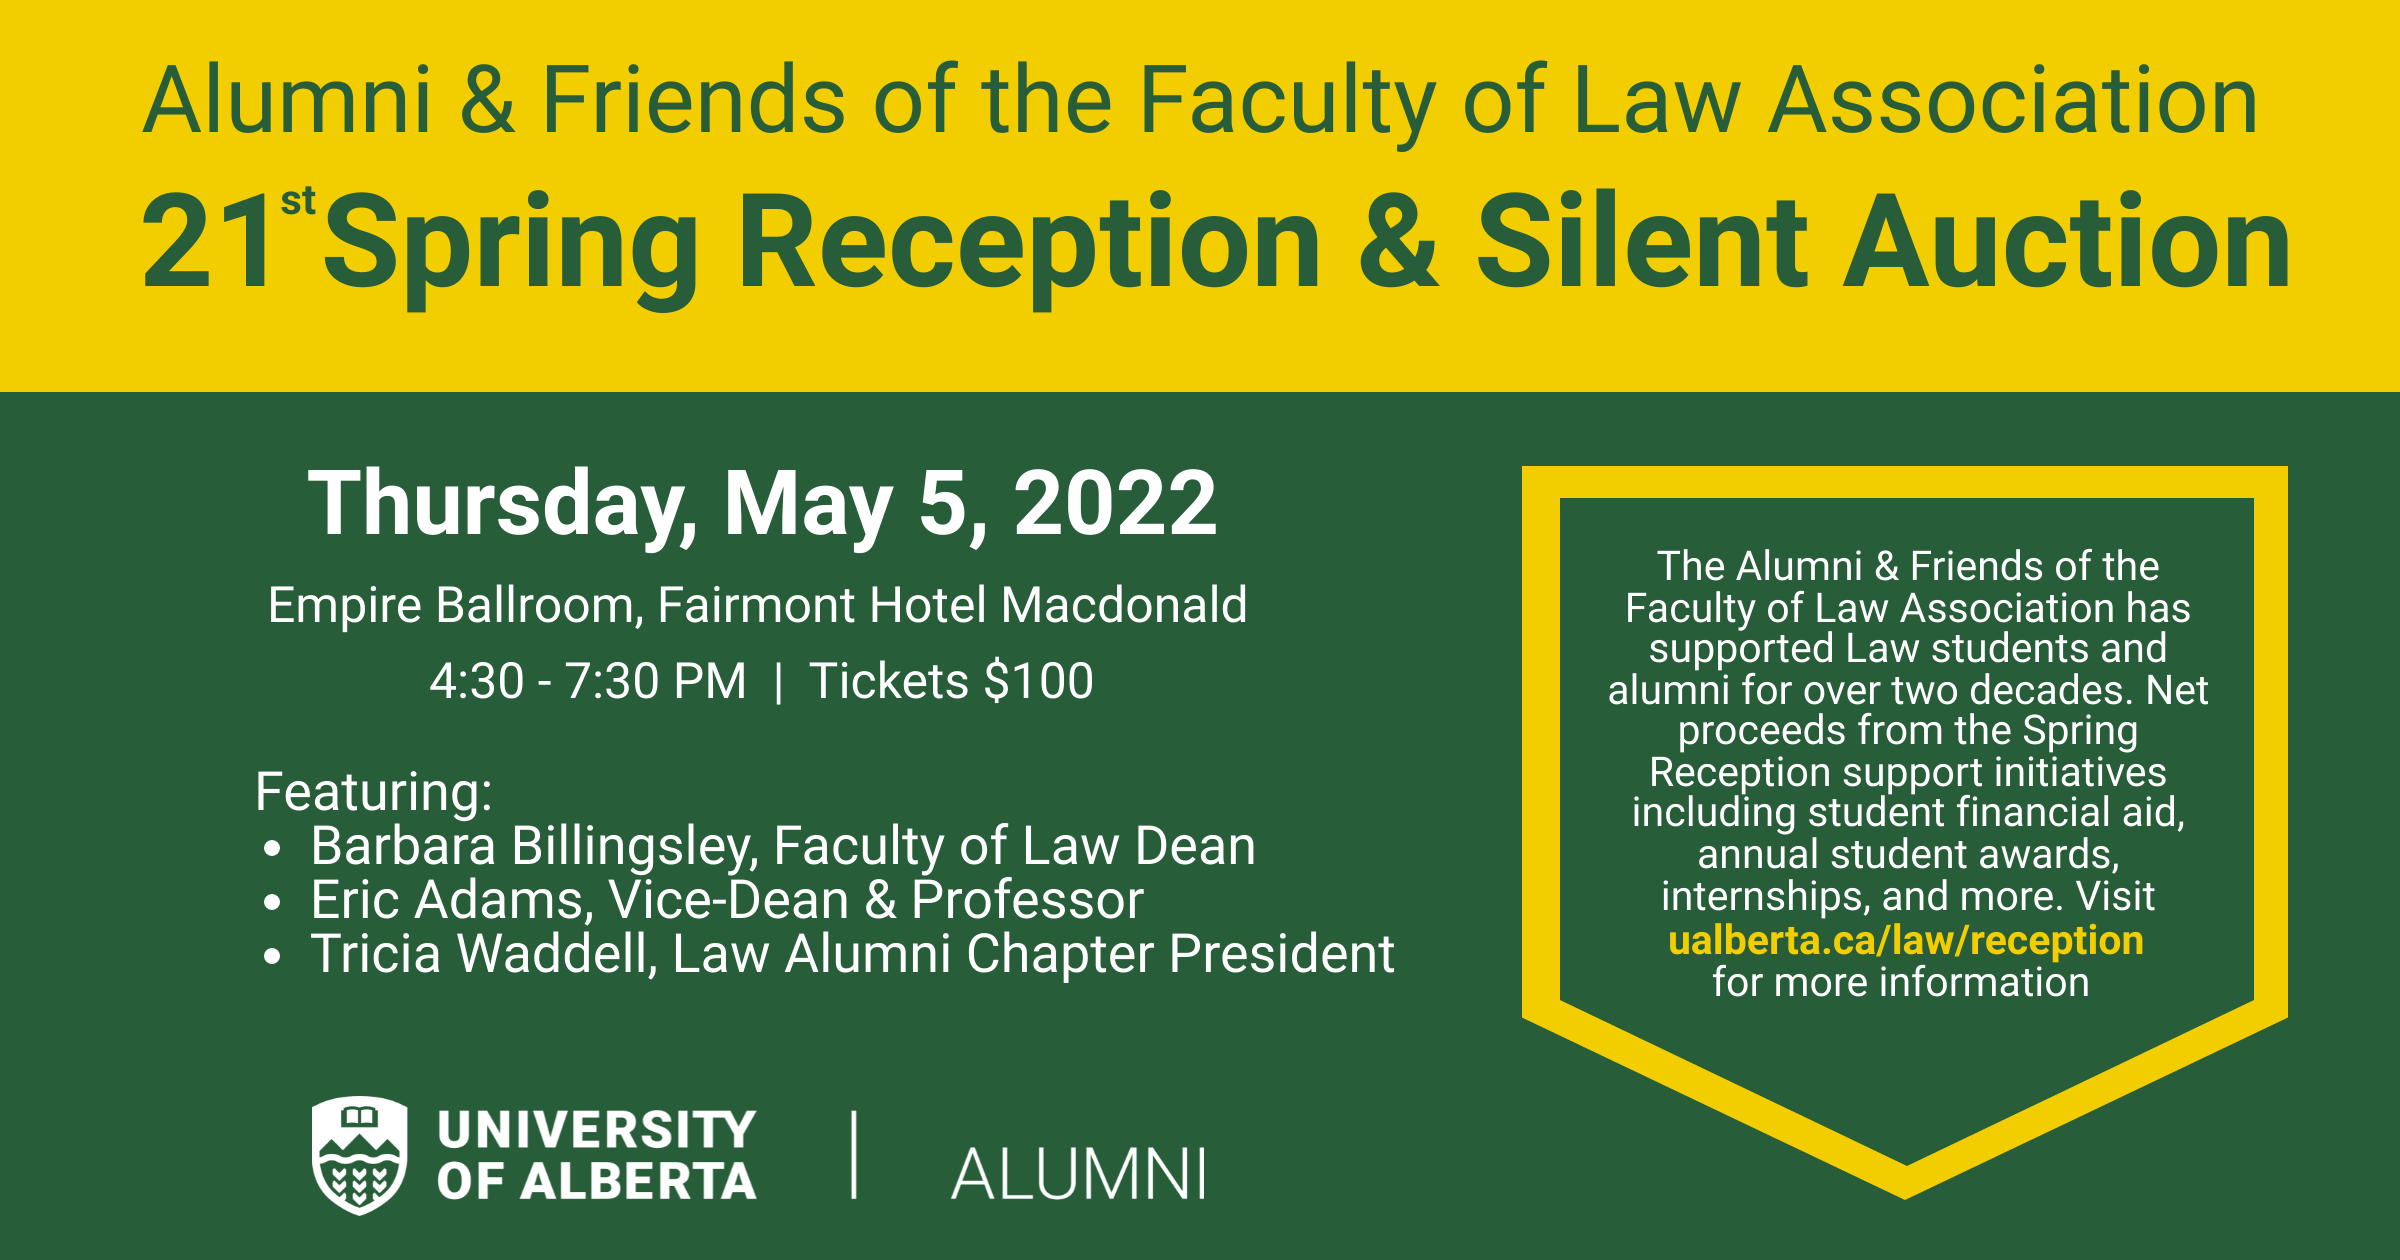 Alumni and Friends of the Faculty of Law Association: 21st Spring Reception and Silent Auction; Thursday, May 5, 2022; Empire Ballroom, Fairmont Hotel Macdonald; 4:30 - 7:30pm | Tickets $100; Featuring: Barbara Billingsley (Faculty of Law Dean), Eric Adams (Vice-Dean and Professor), Tricia Waddell (Law Alumni Chapter President); The Alumni and Friends of the Faculty of Law Association has supported Law students and alumni for over two decades.  Net proceeds from the Spring Reception support initiatives including student financial aid, annual student awards, interships, and more.  Visit ualberta.ca/law/reception for more information; UAlberta | Alumni